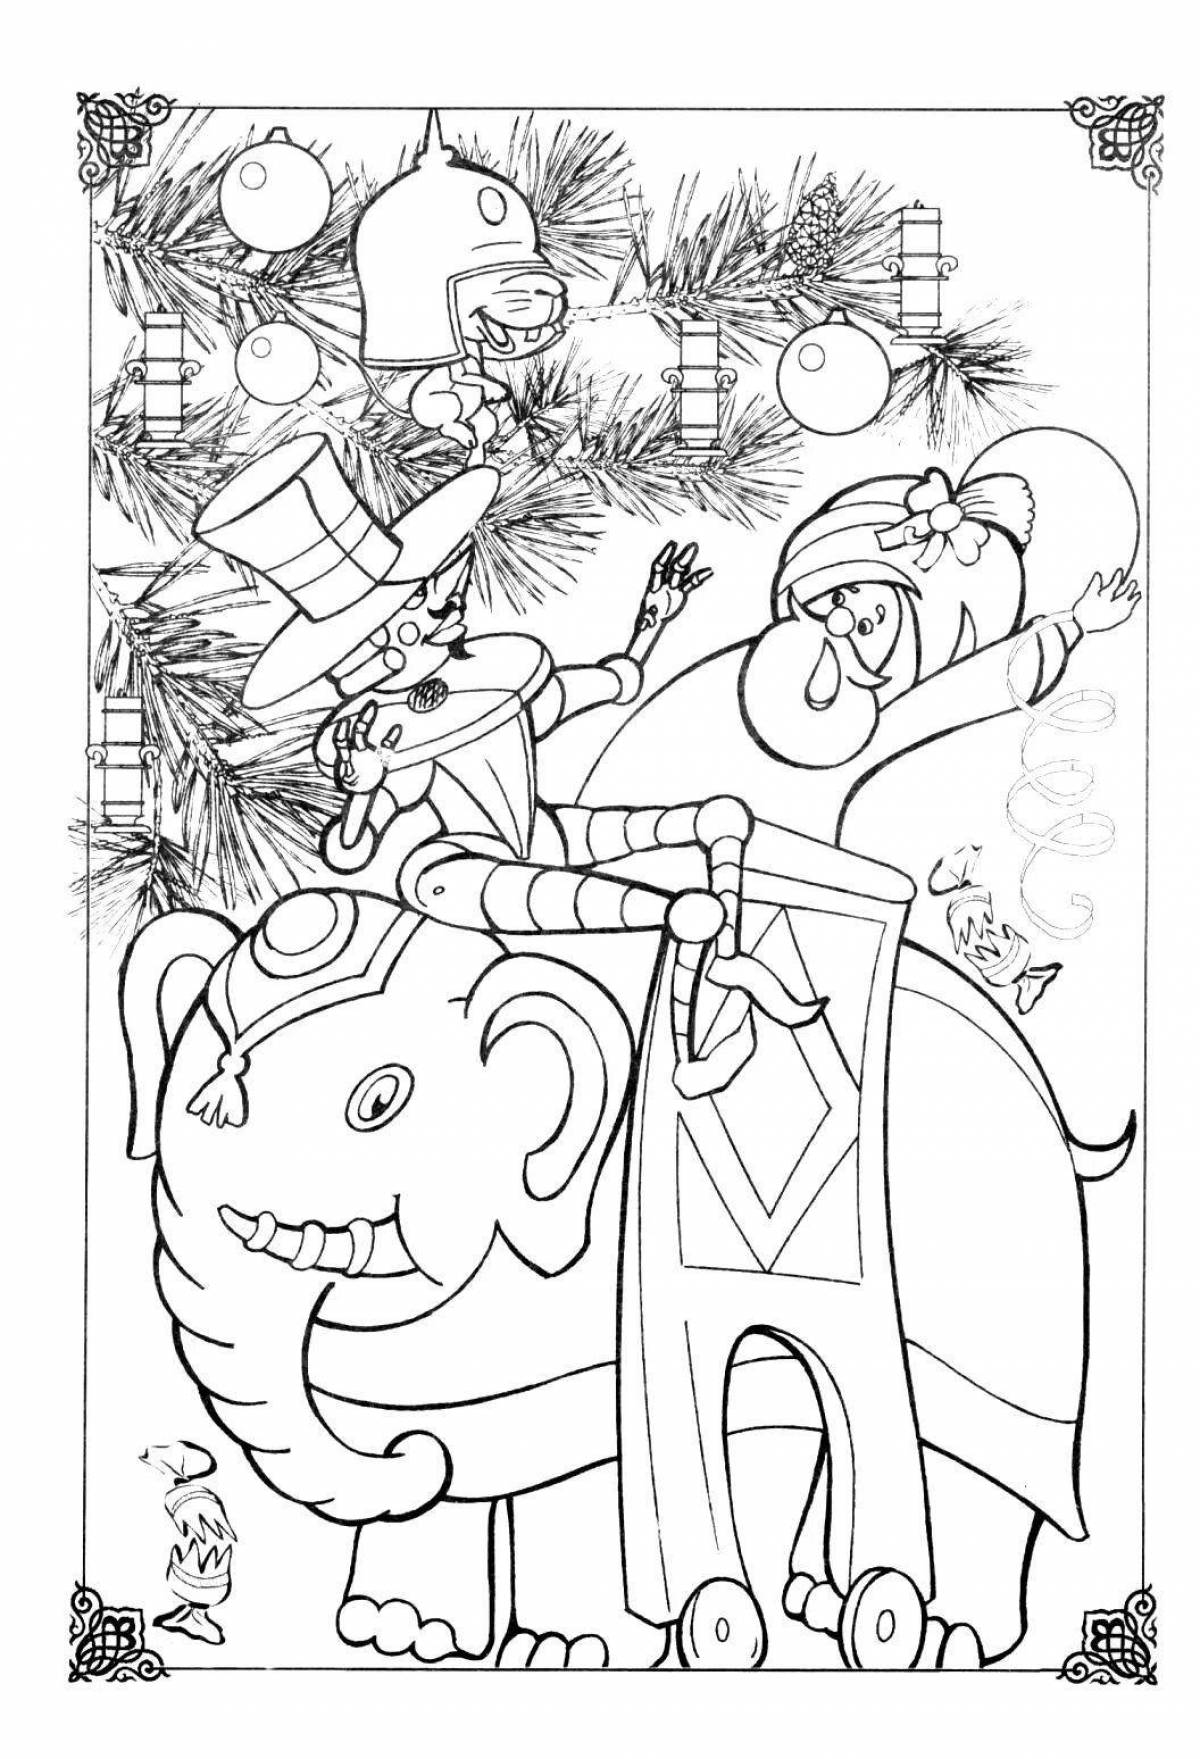 Brilliant nutcracker and mouse king coloring book